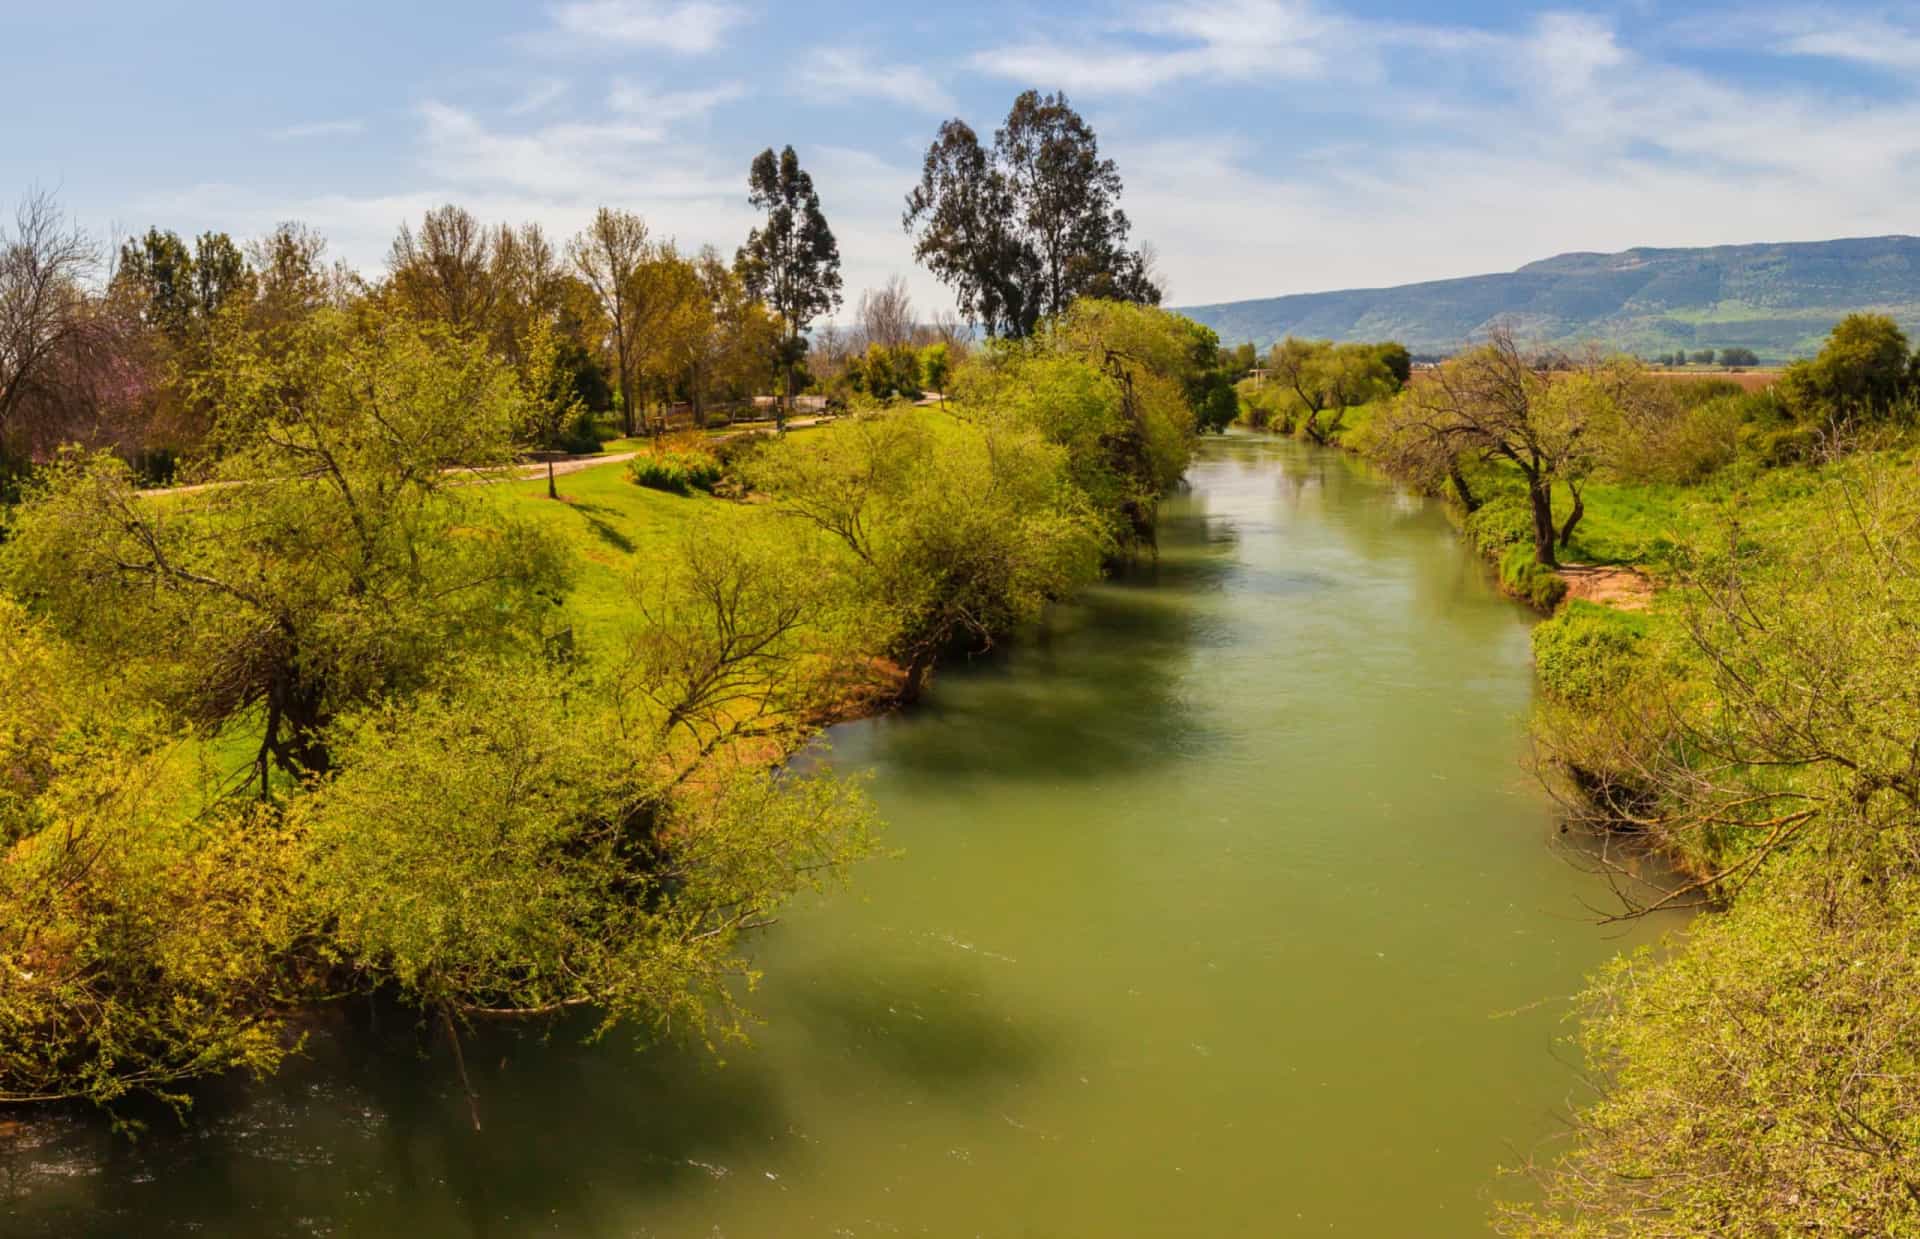 <p>The Jordan River holds major significance in Judaism and Christianity. According to the Bible, the Israelites crossed it into the Promised Land, and Jesus of Nazareth was baptized by John the Baptist in its muddy waters.</p>